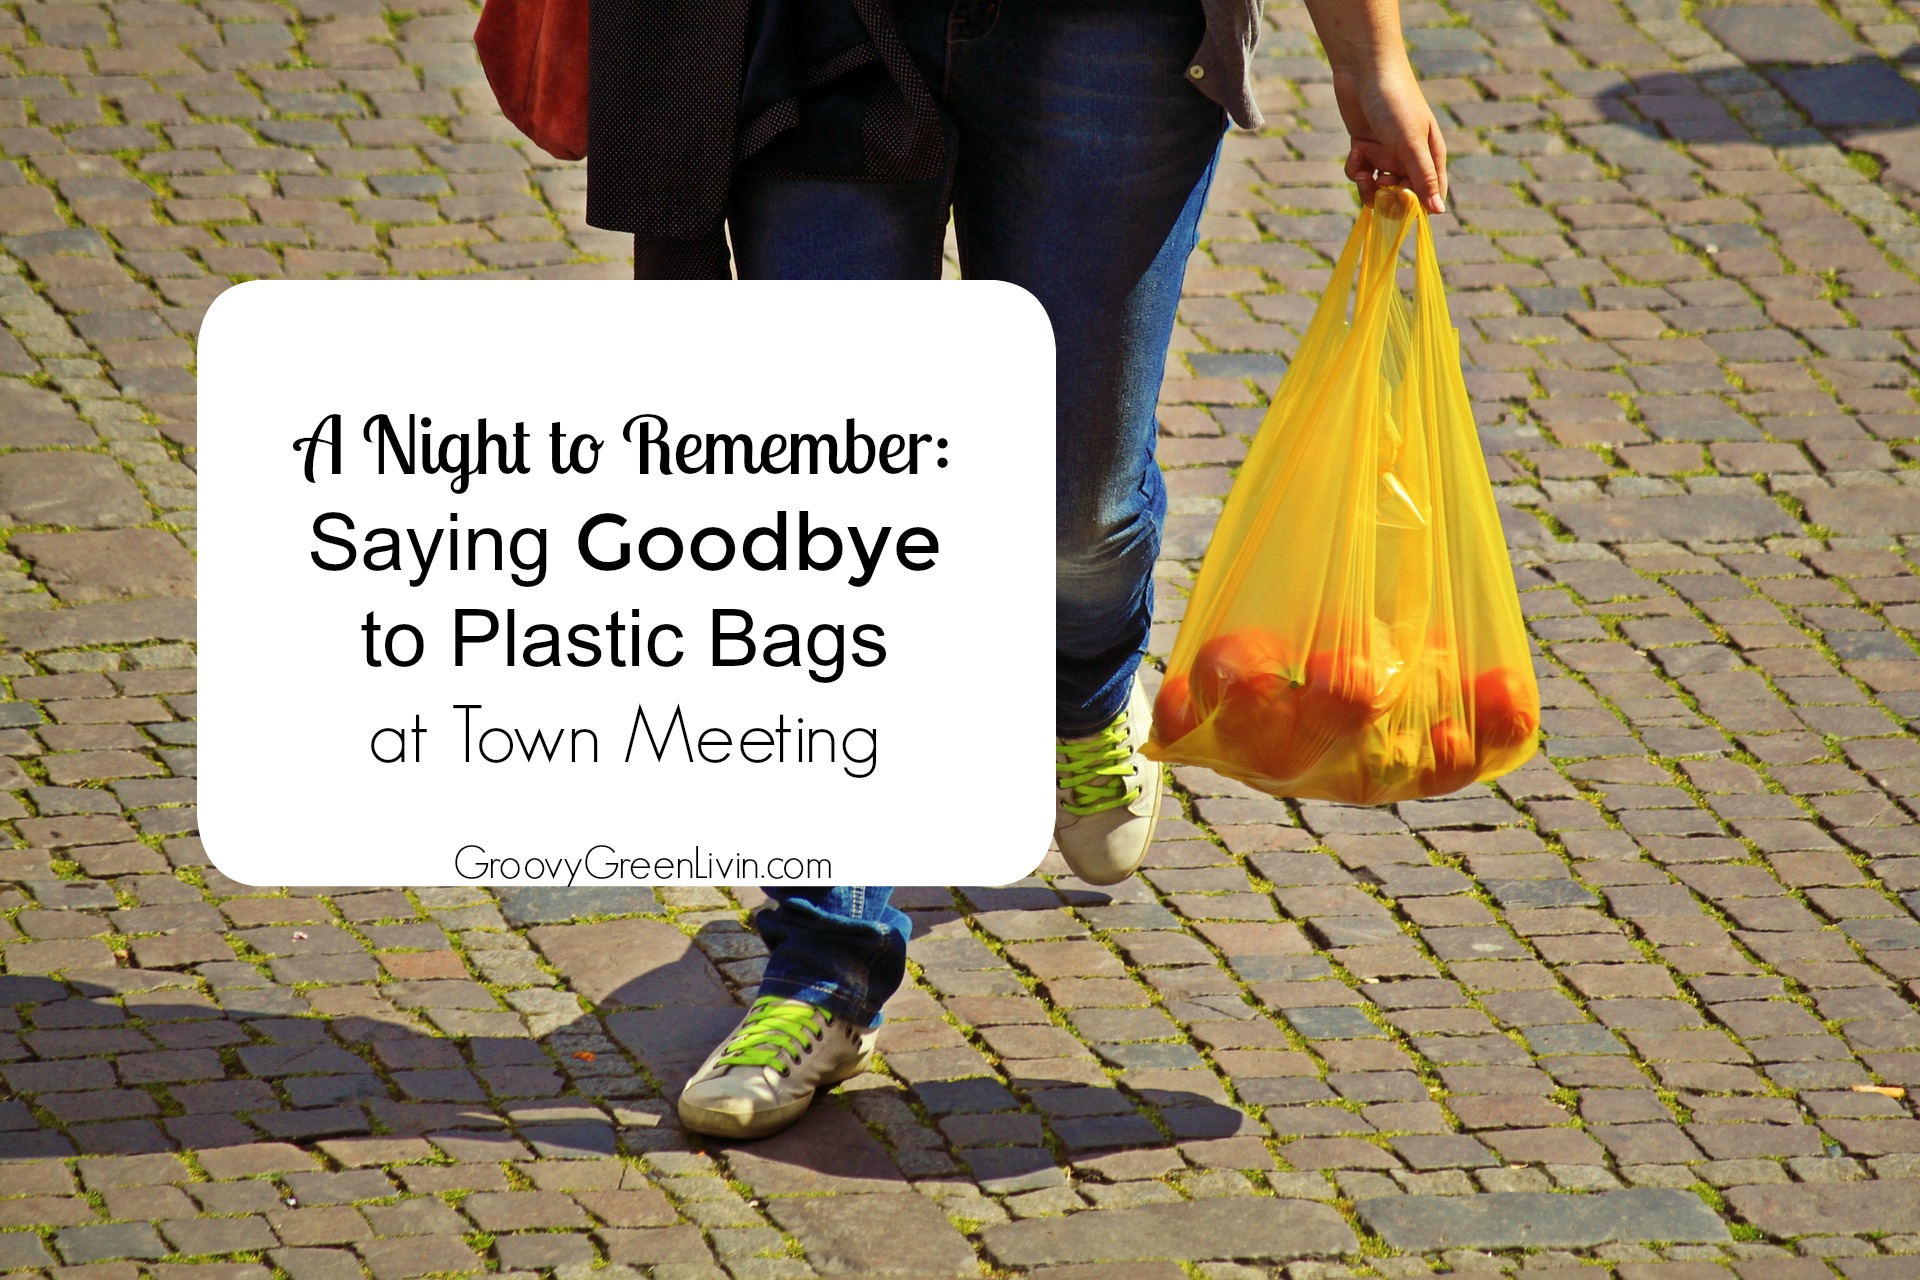 A Night to Remember: Saying Goodbye to Plastic Bags at Town Meeting